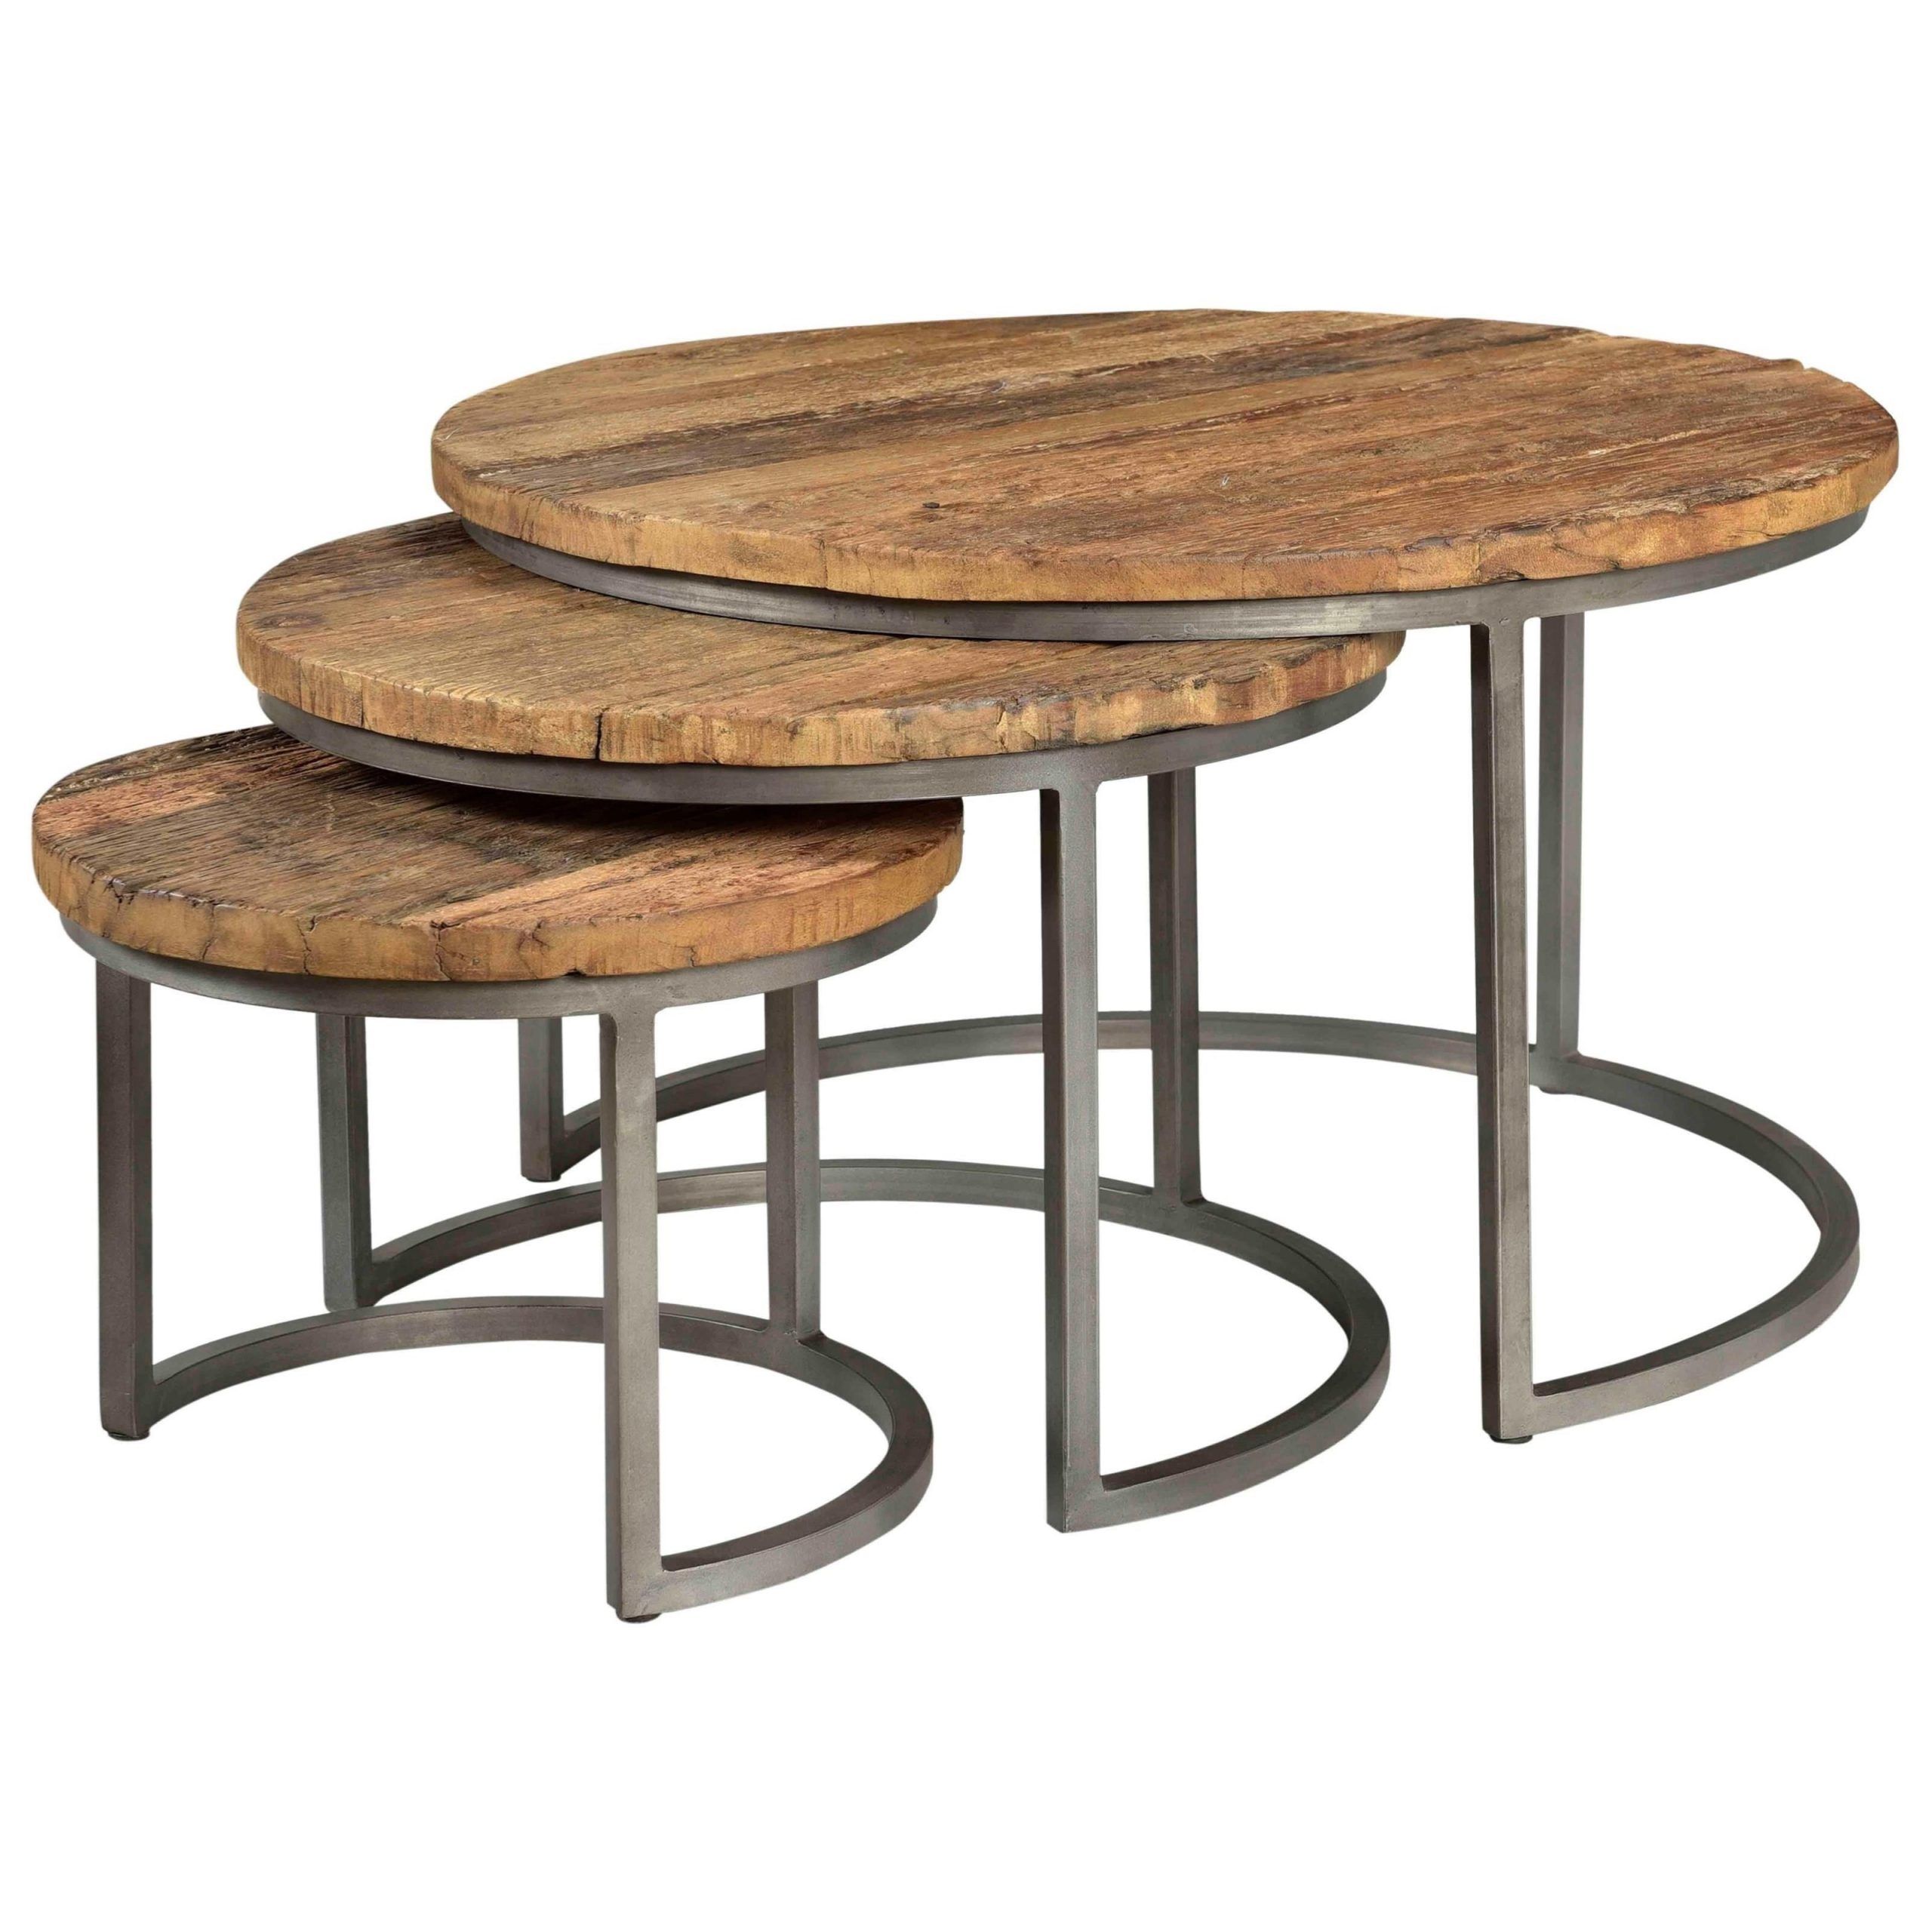 Fashionable Riverside Furniture Tania Rustic Nesting Cocktail Table Set With Throughout Rustic Barnside Cocktail Tables (View 10 of 10)